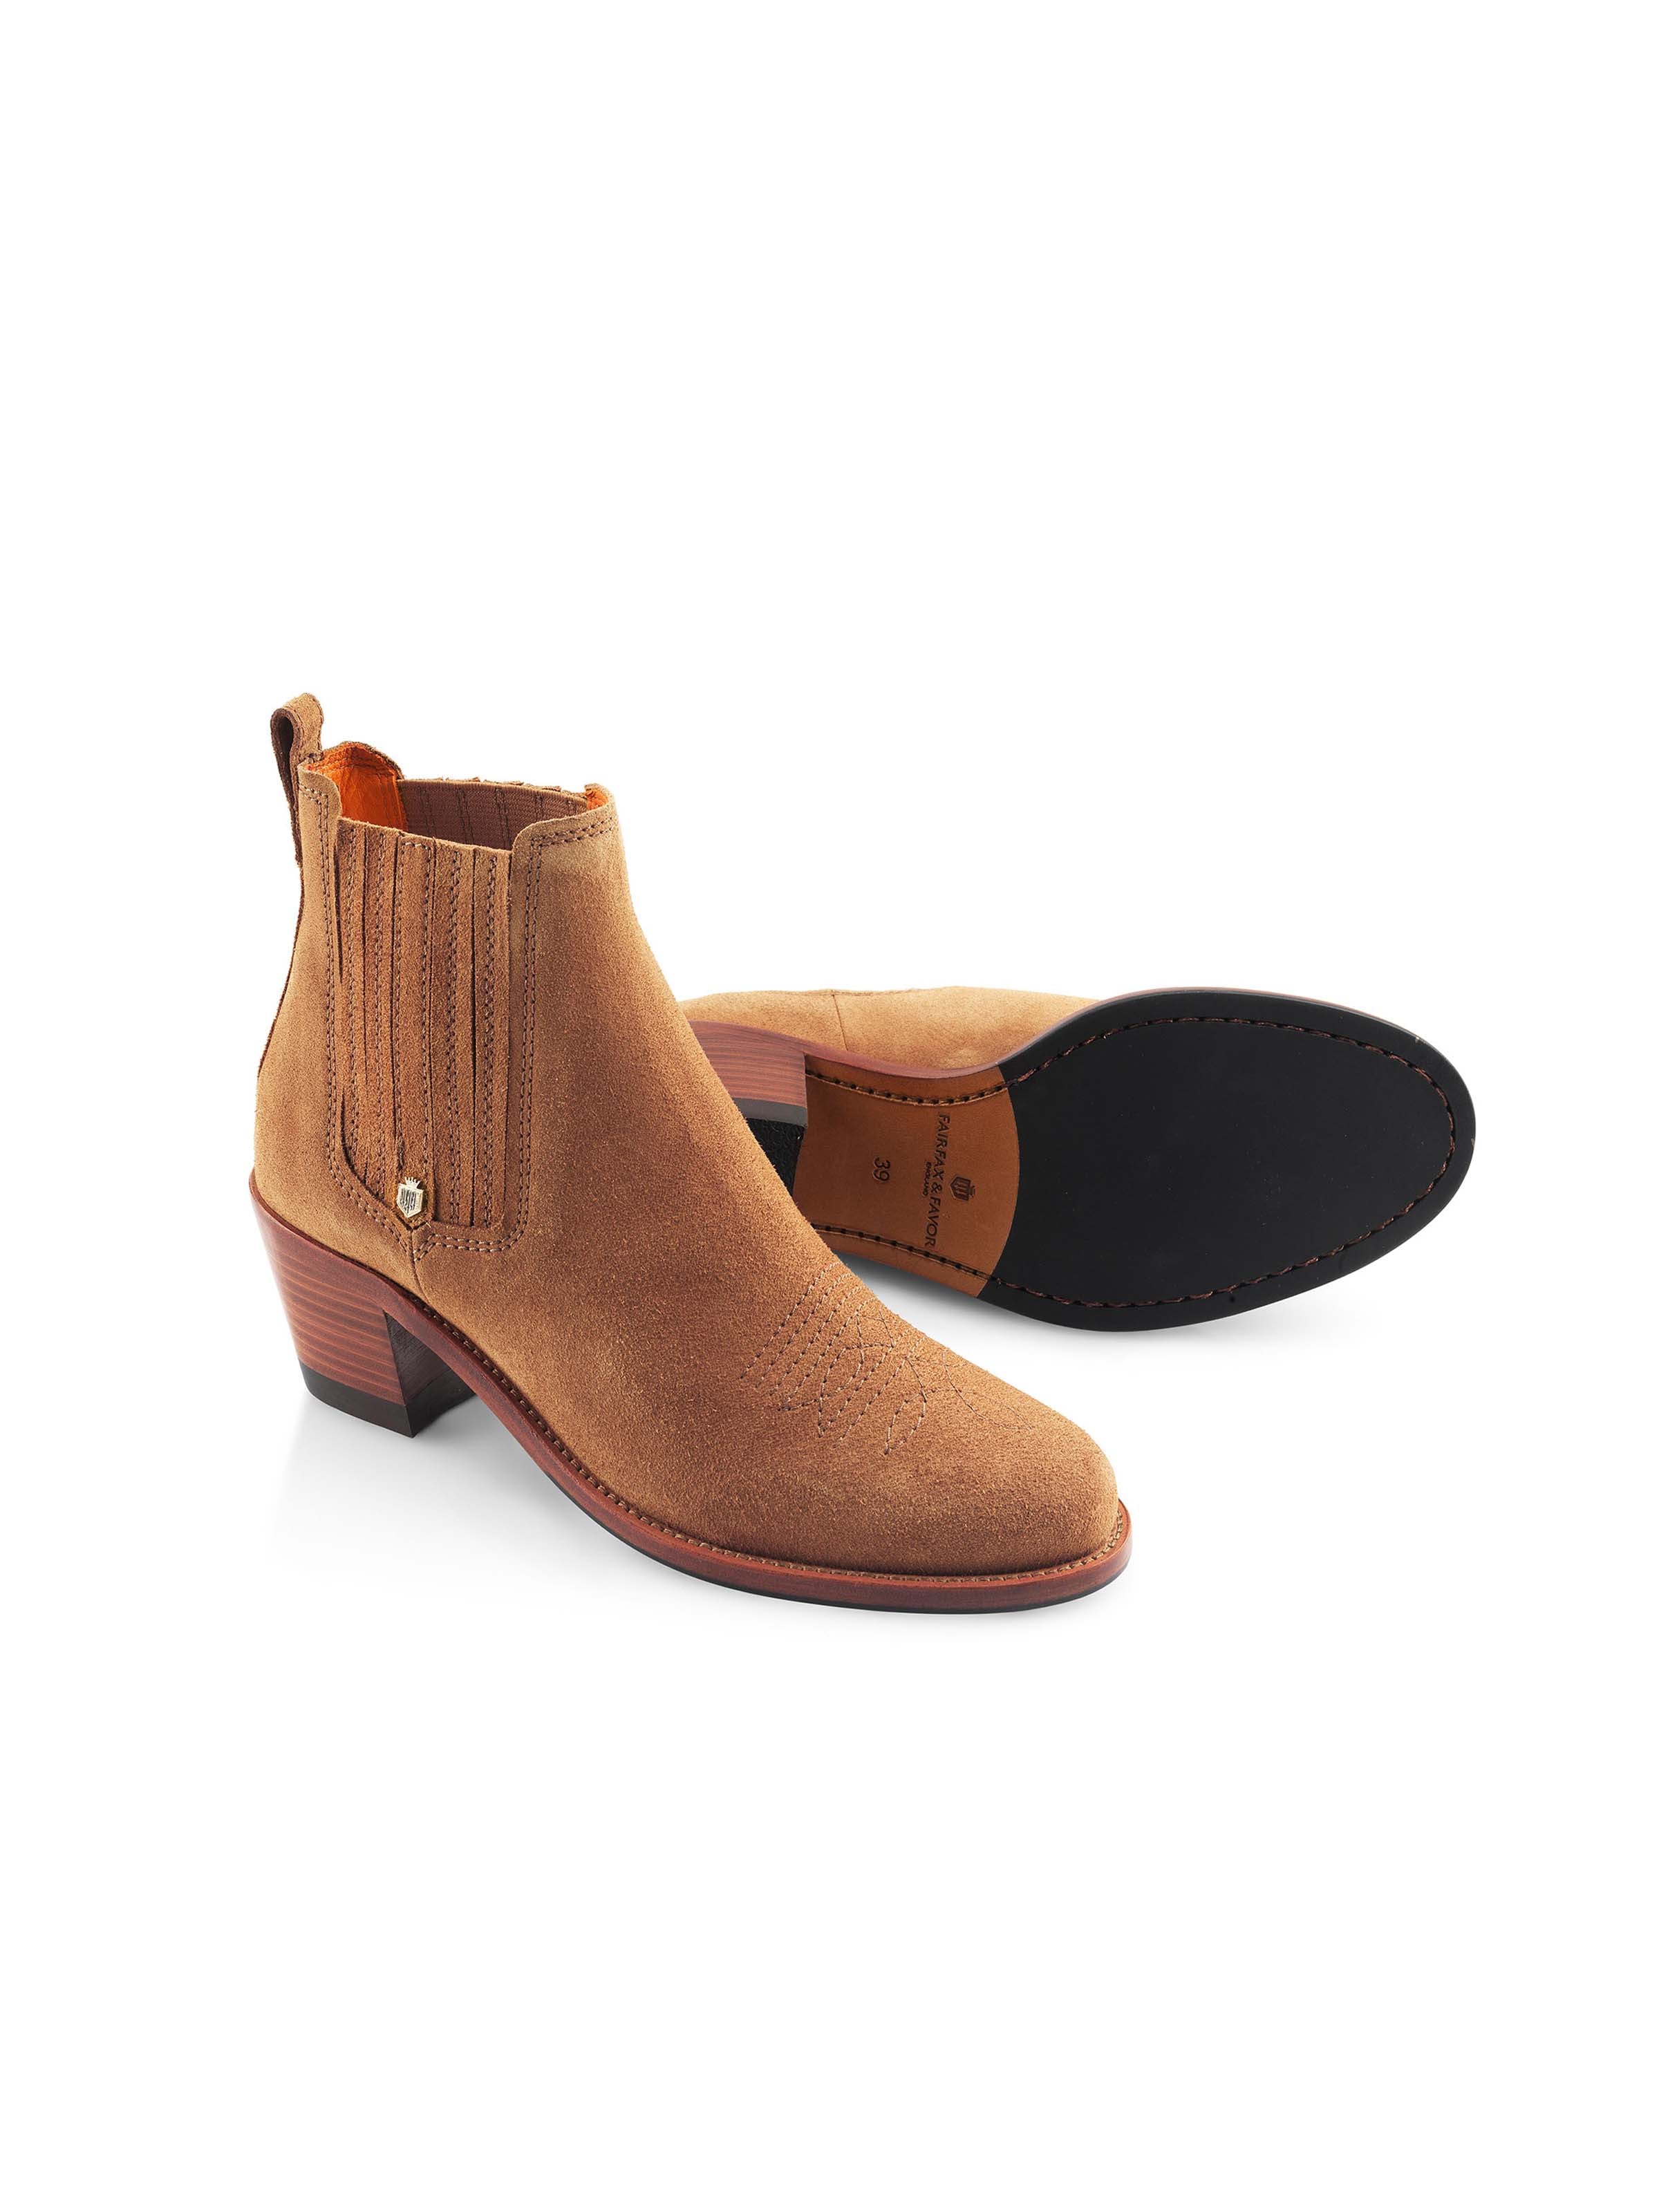 The Rockingham Ankle Boot - Tan Suede